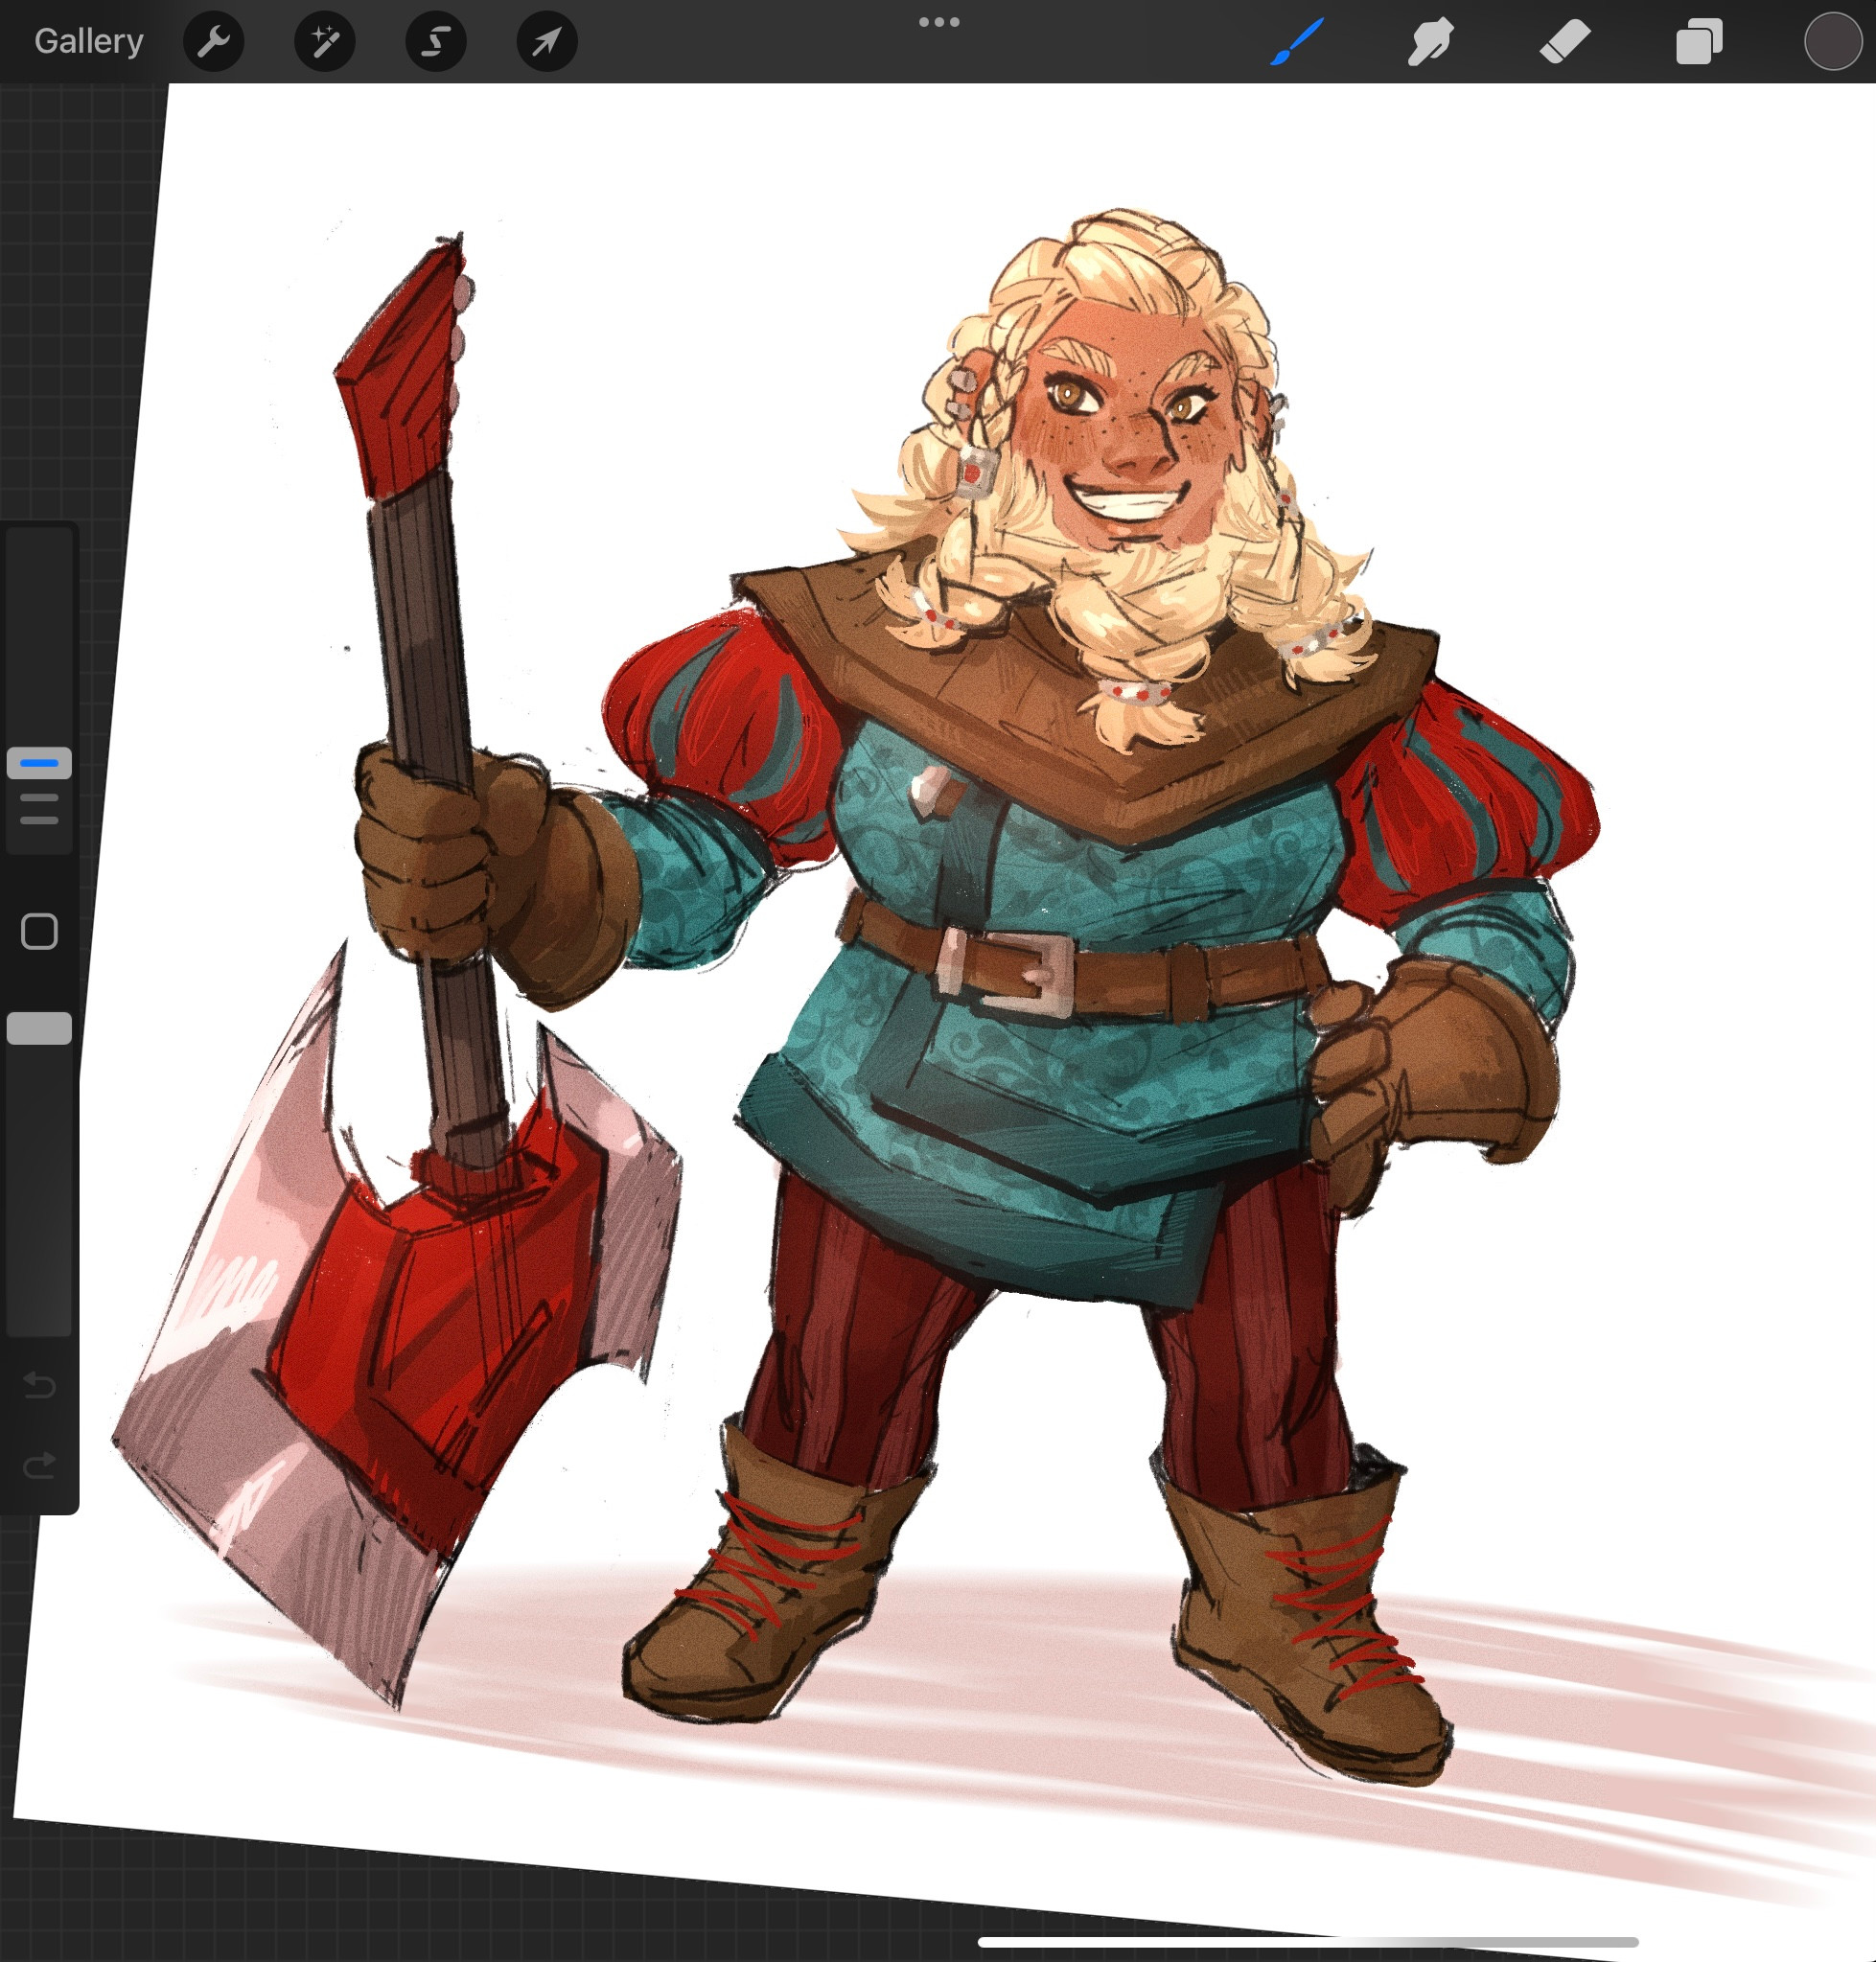 A Bard-Barian dwarf named Lita in case Robb dies (it has almost happened twice)